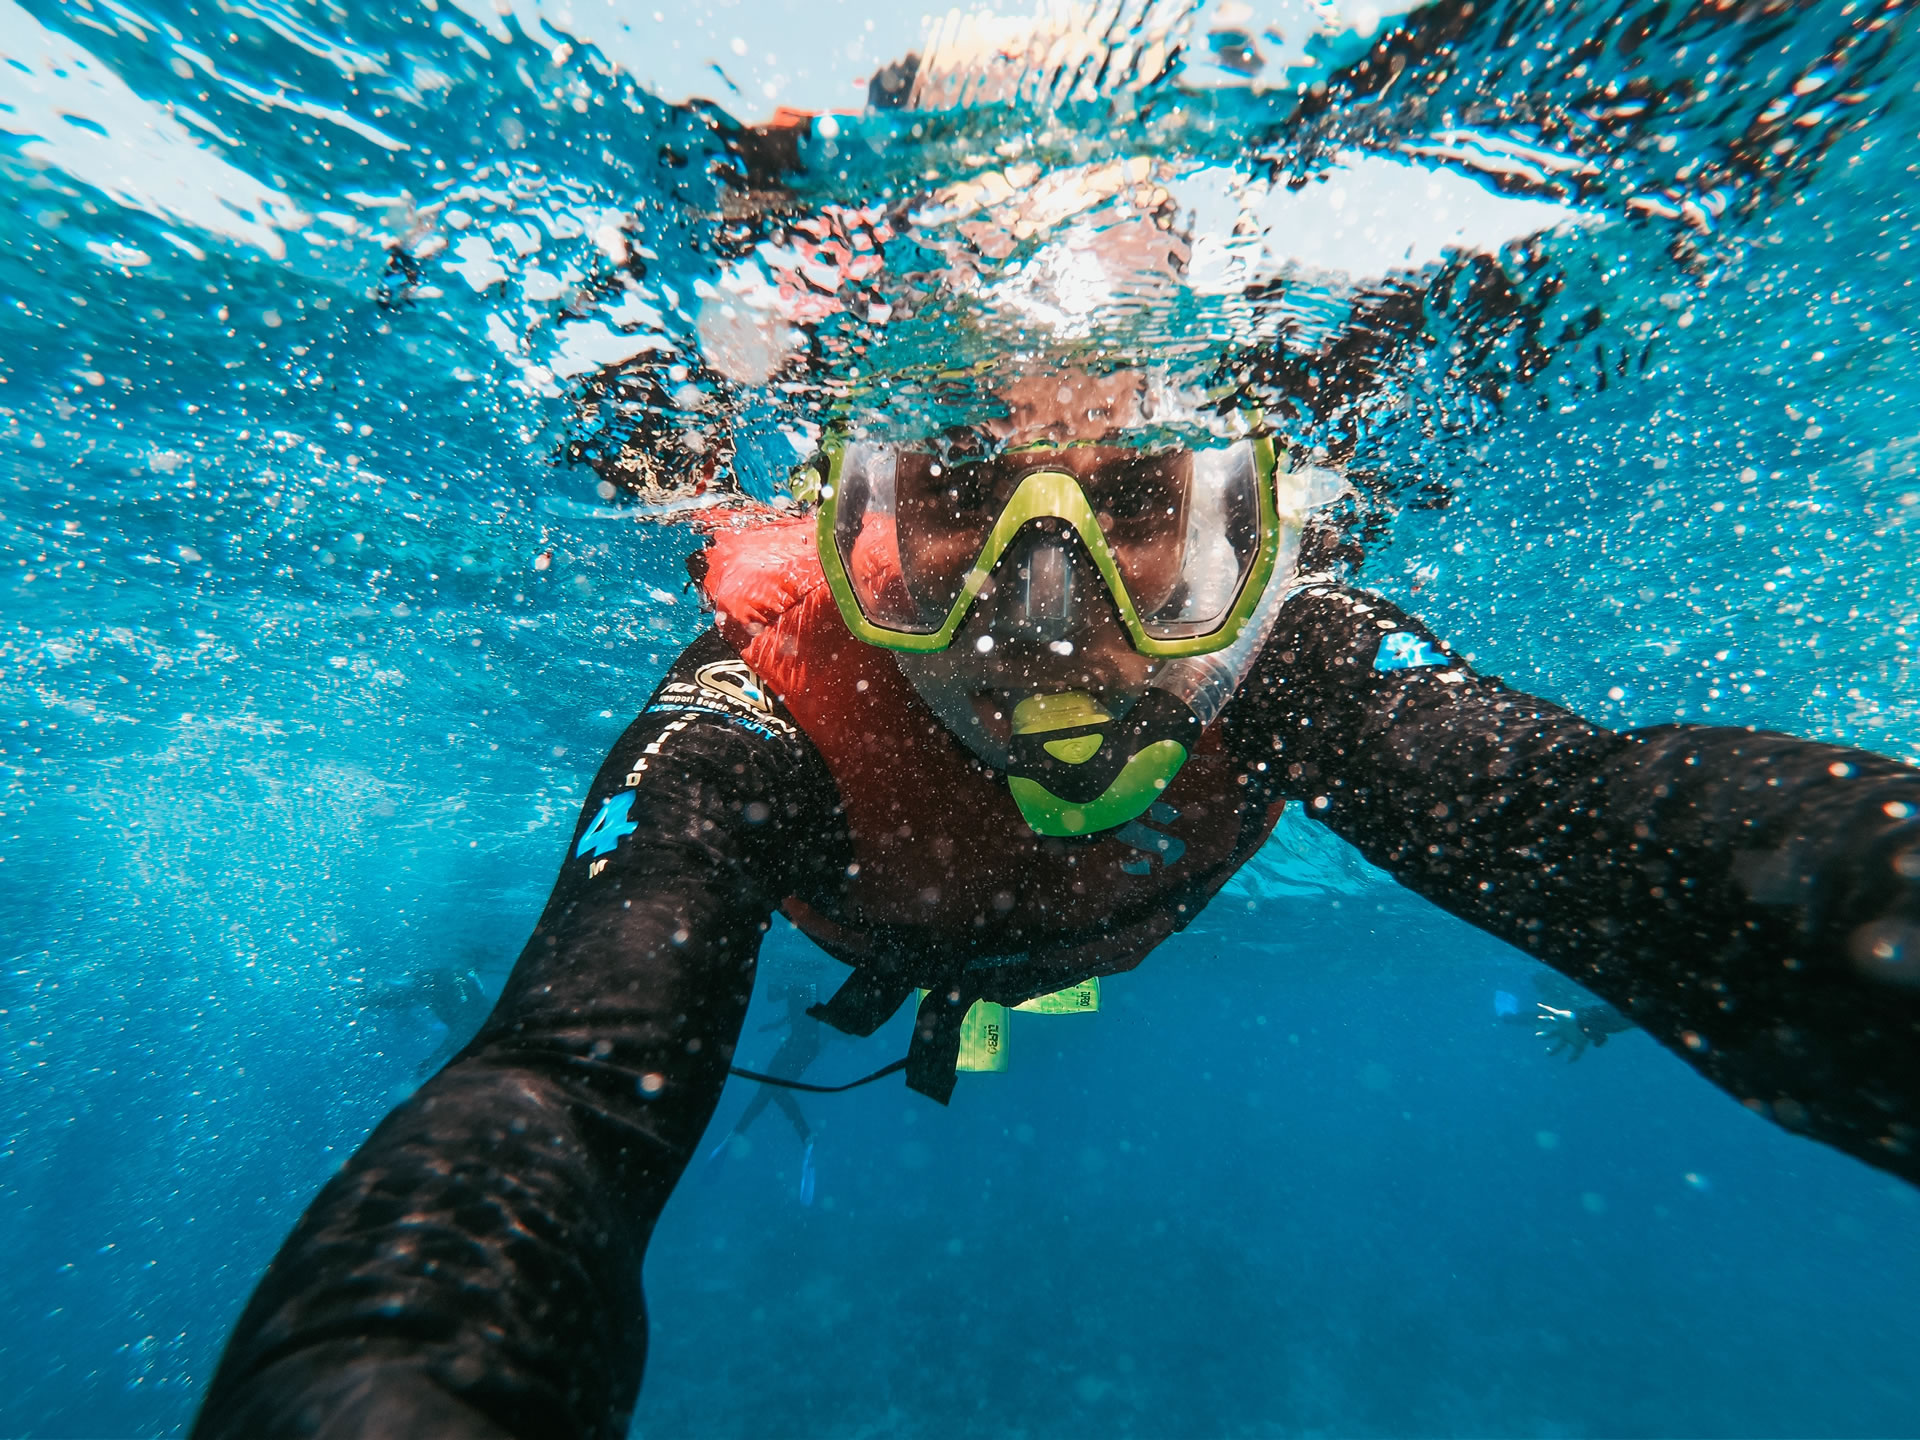 An underwater close-up of a person snorkeling.